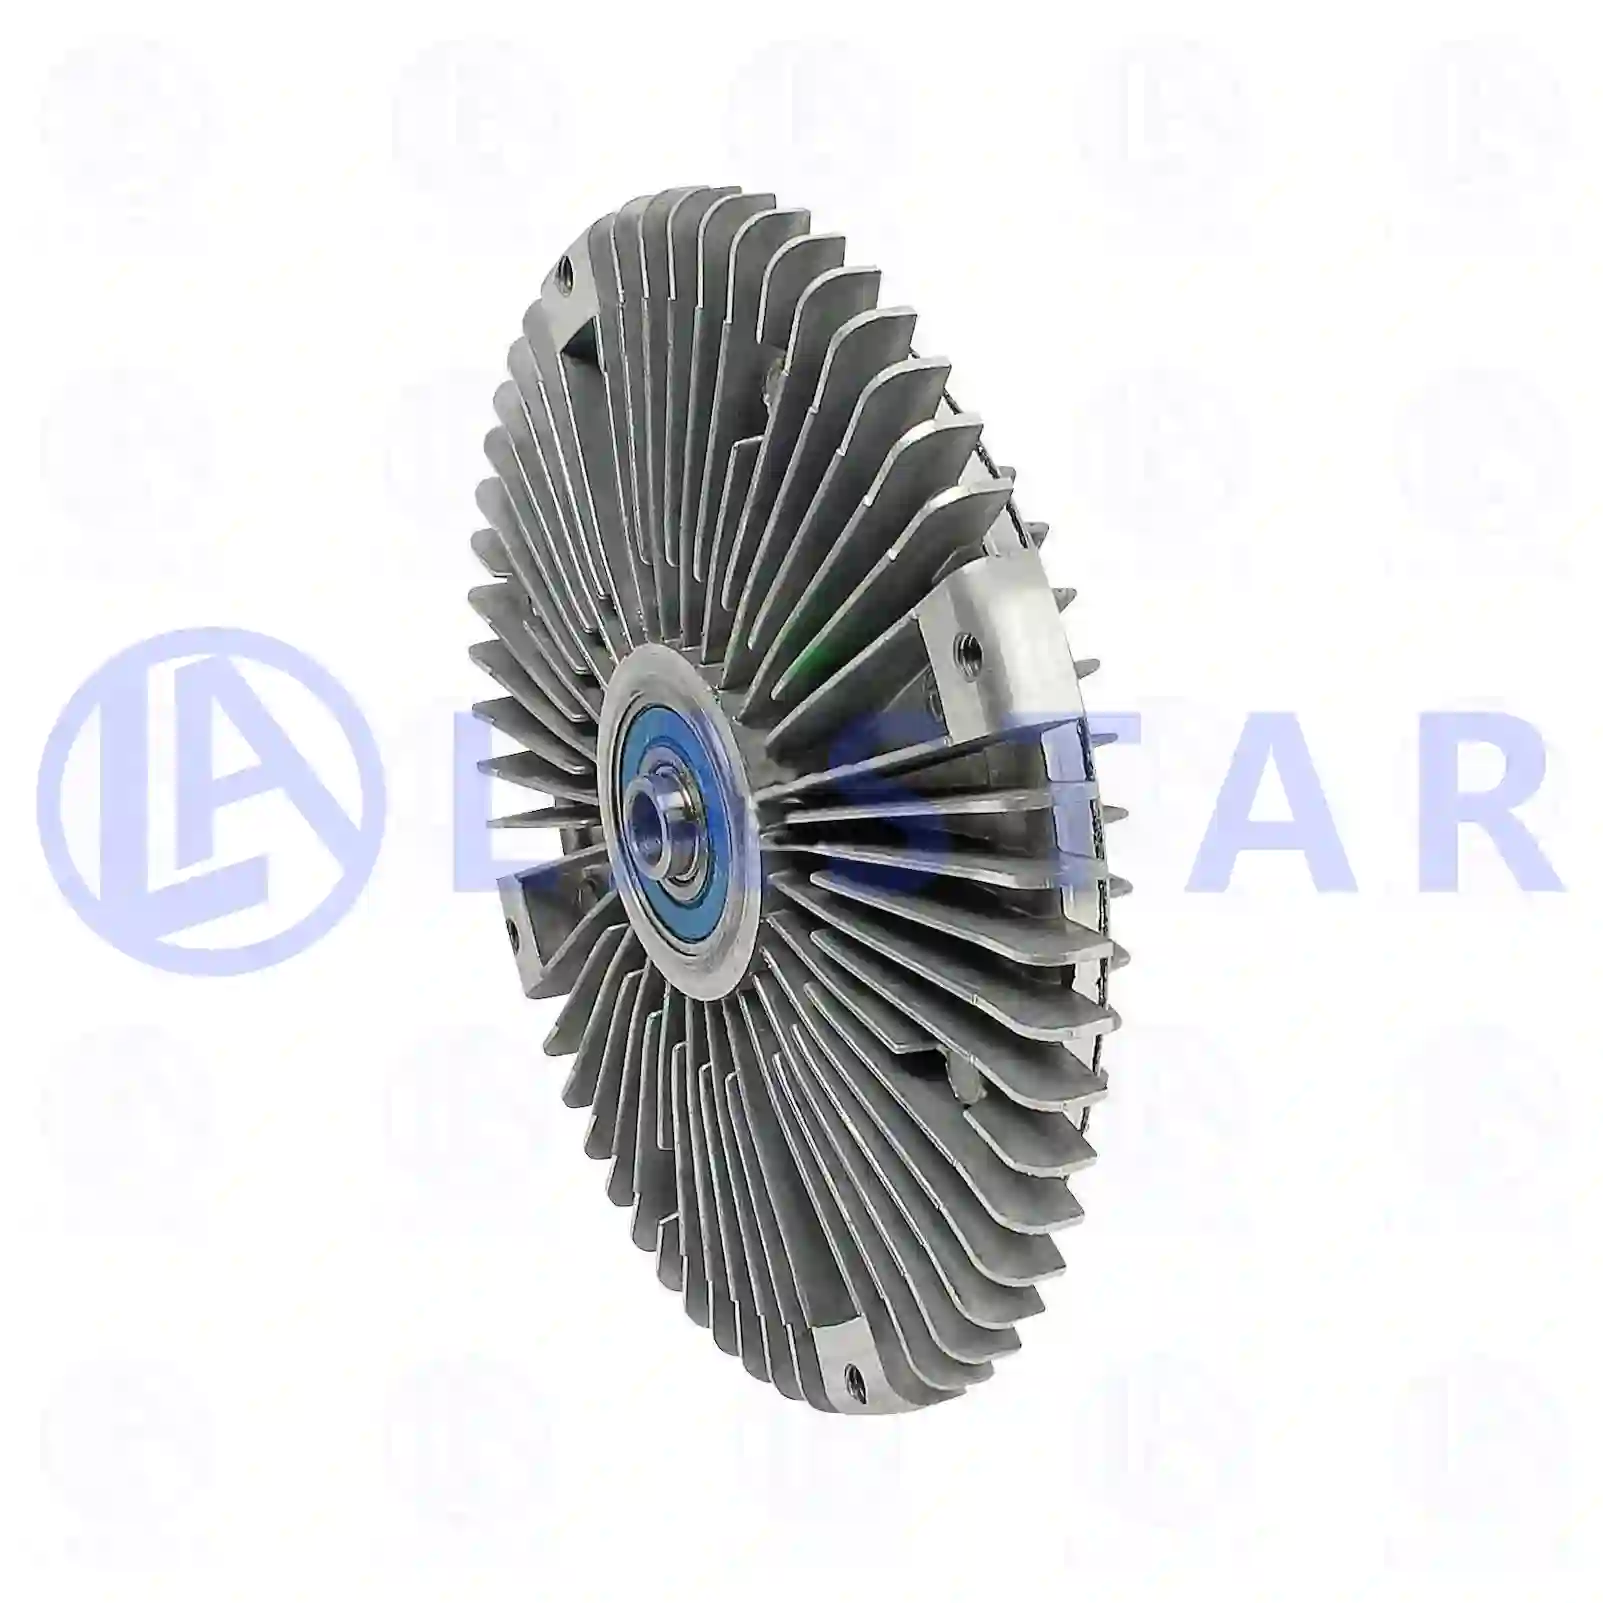 Fan clutch, 77708141, 6022000122, 6032 ||  77708141 Lastar Spare Part | Truck Spare Parts, Auotomotive Spare Parts Fan clutch, 77708141, 6022000122, 6032 ||  77708141 Lastar Spare Part | Truck Spare Parts, Auotomotive Spare Parts